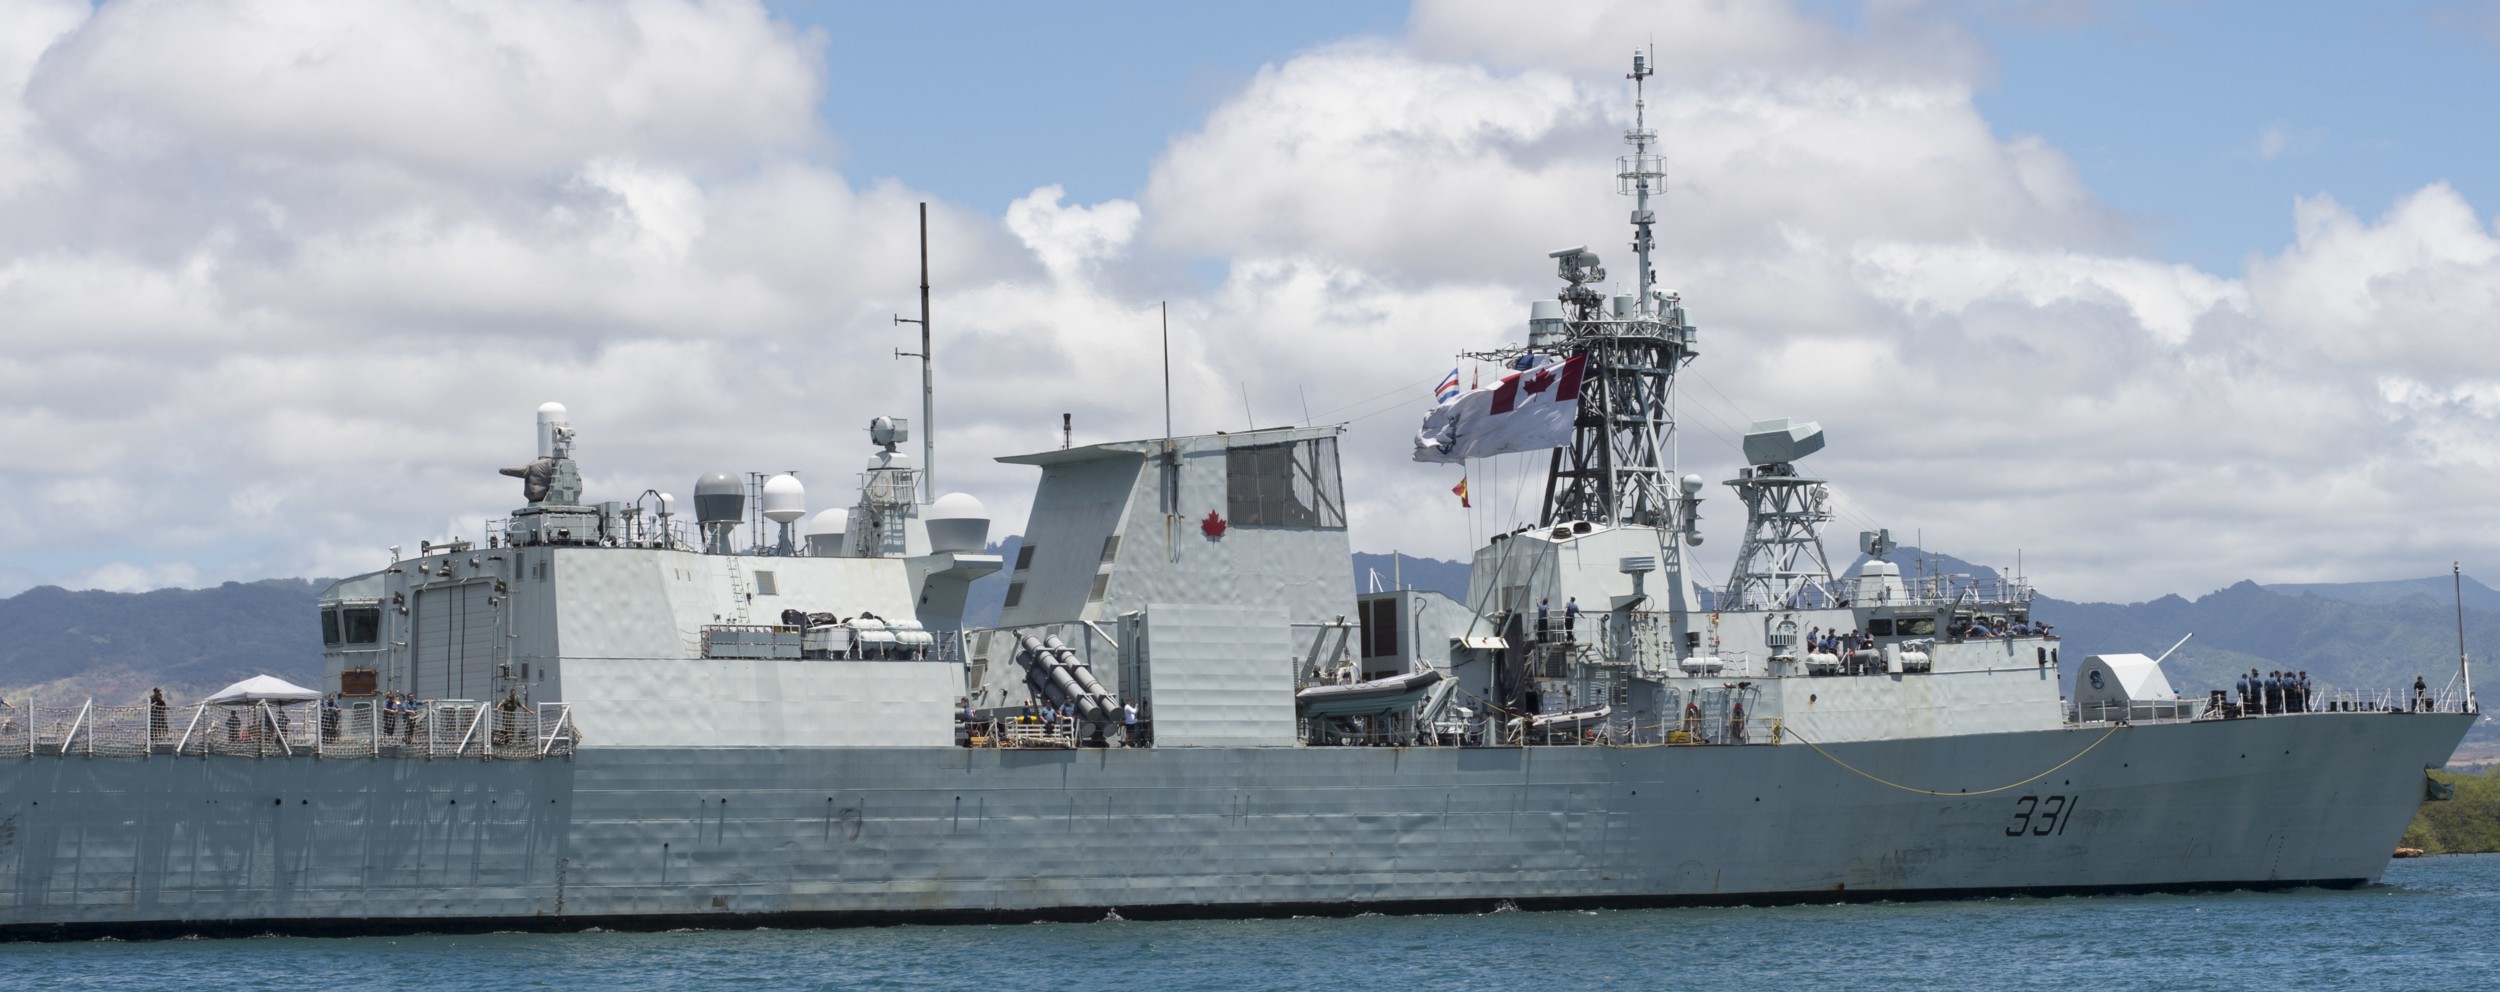 ffh-331 hmcs vancouver halifax class helicopter patrol frigate ncsm royal canadian navy 13